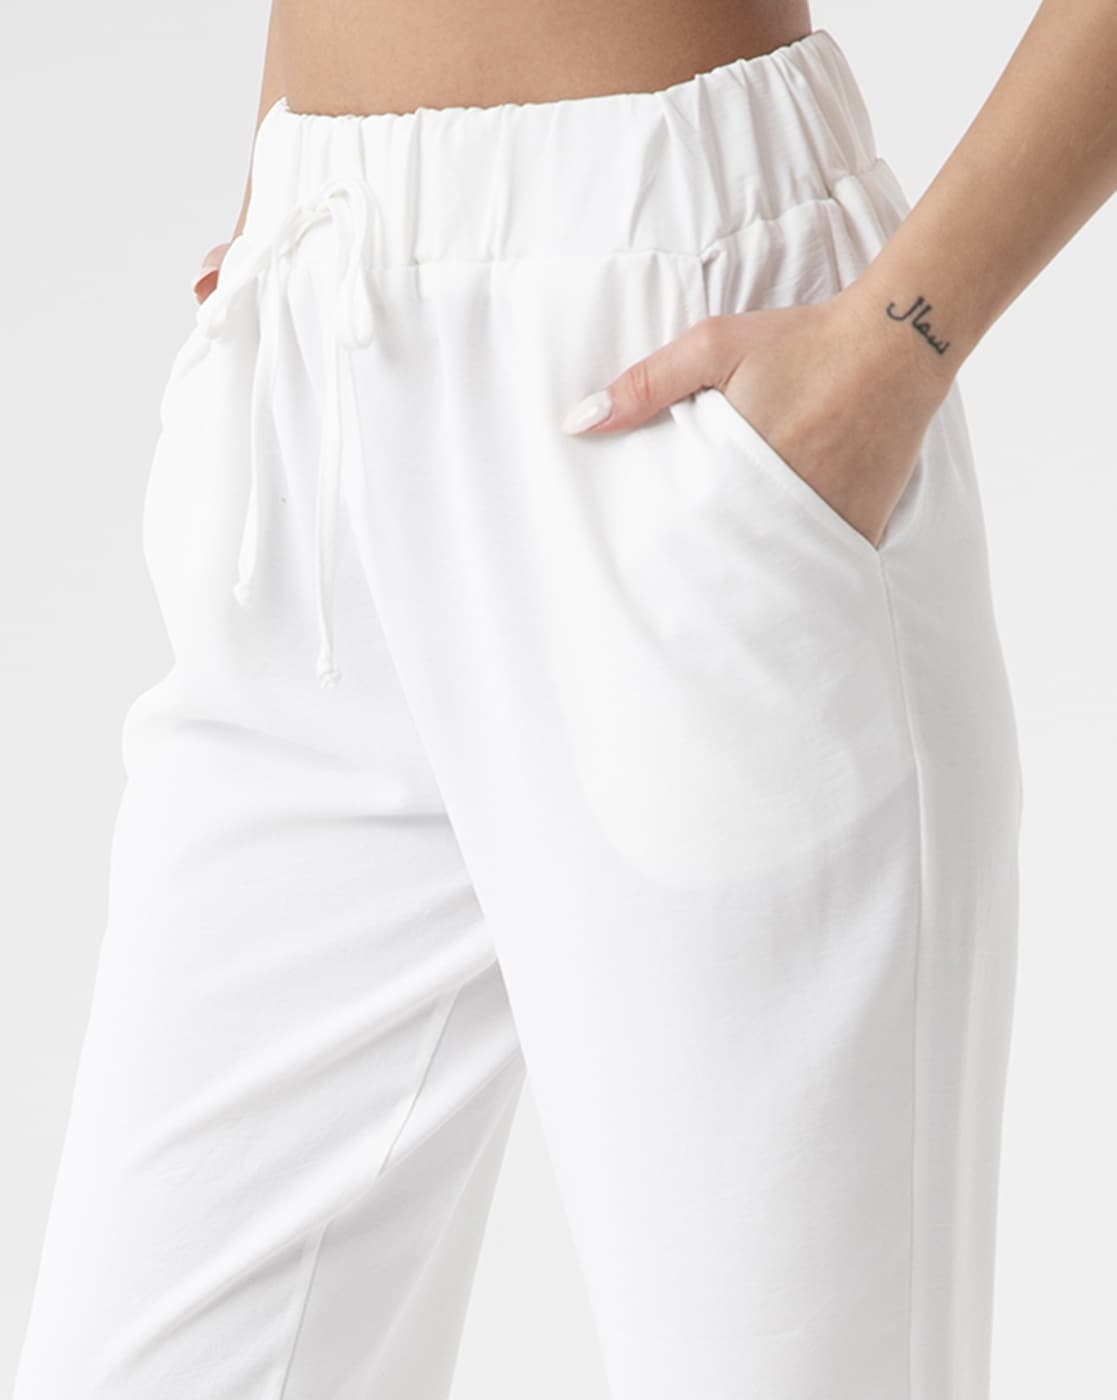 White High Waist Tapered Trousers